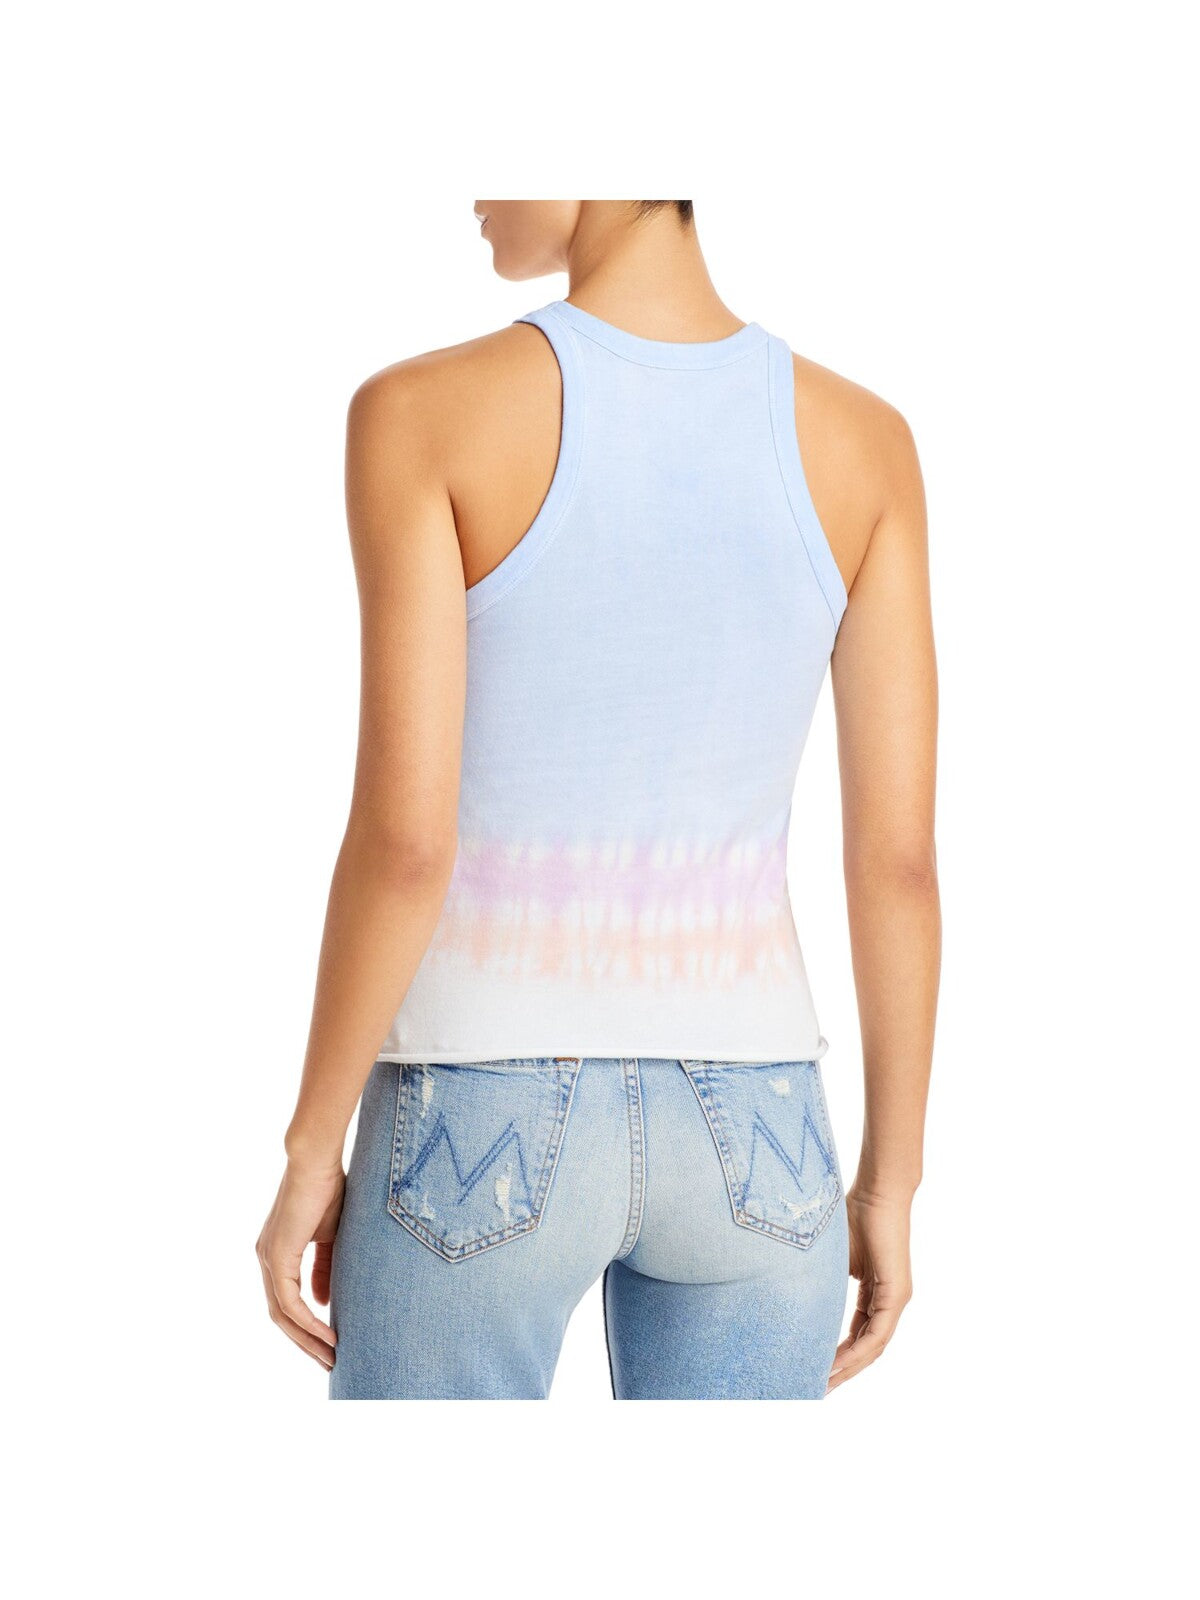 WSLY Womens Light Blue Ribbed Ombre Sleeveless Crew Neck Tank Top M